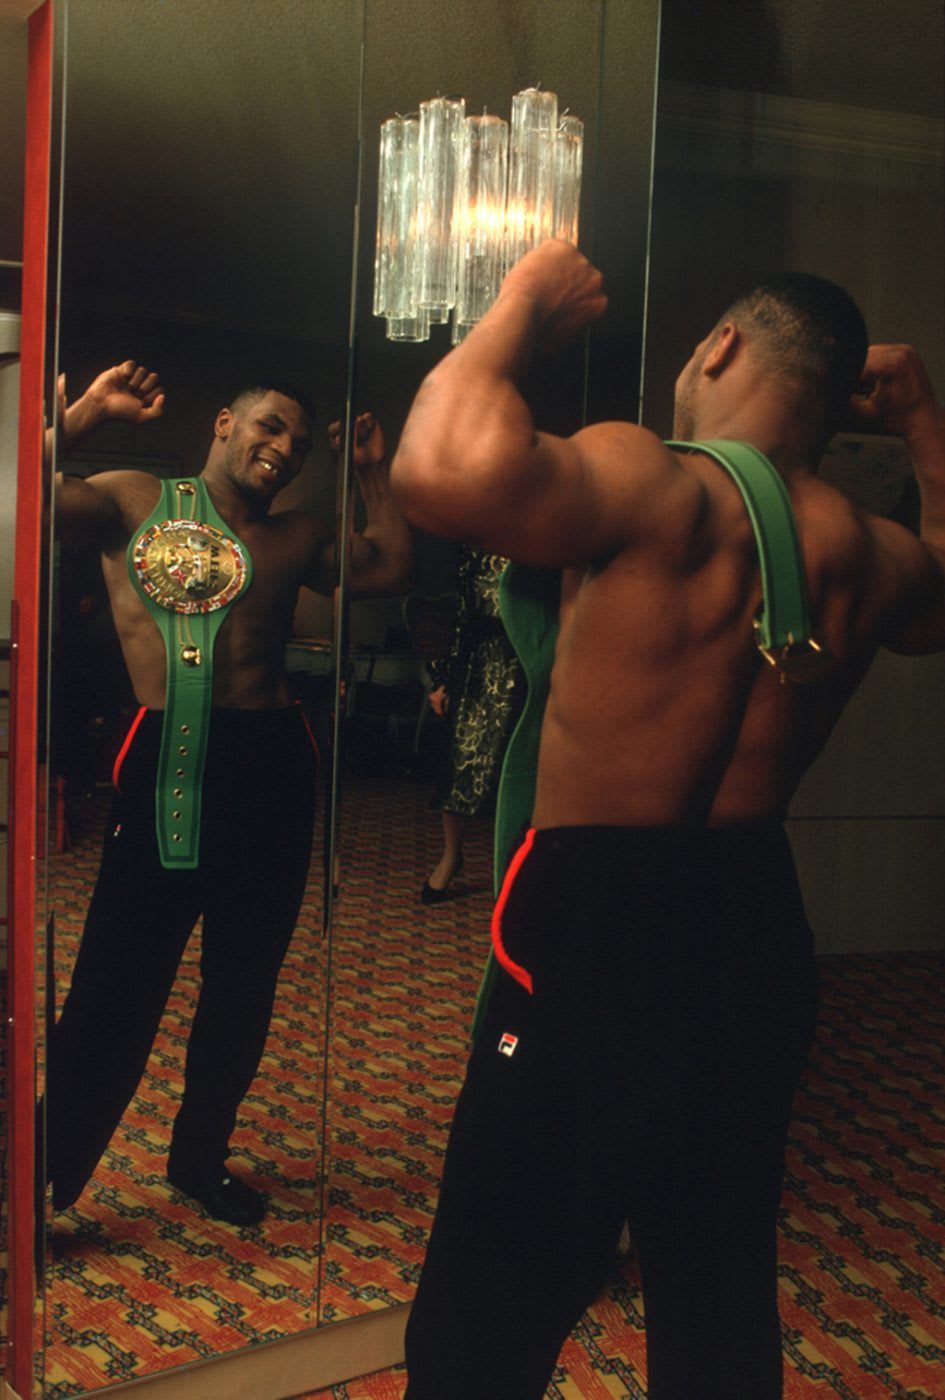 Lori Grinker’s Artful Photographs of a Young Mike Tyson Are a Knockout!